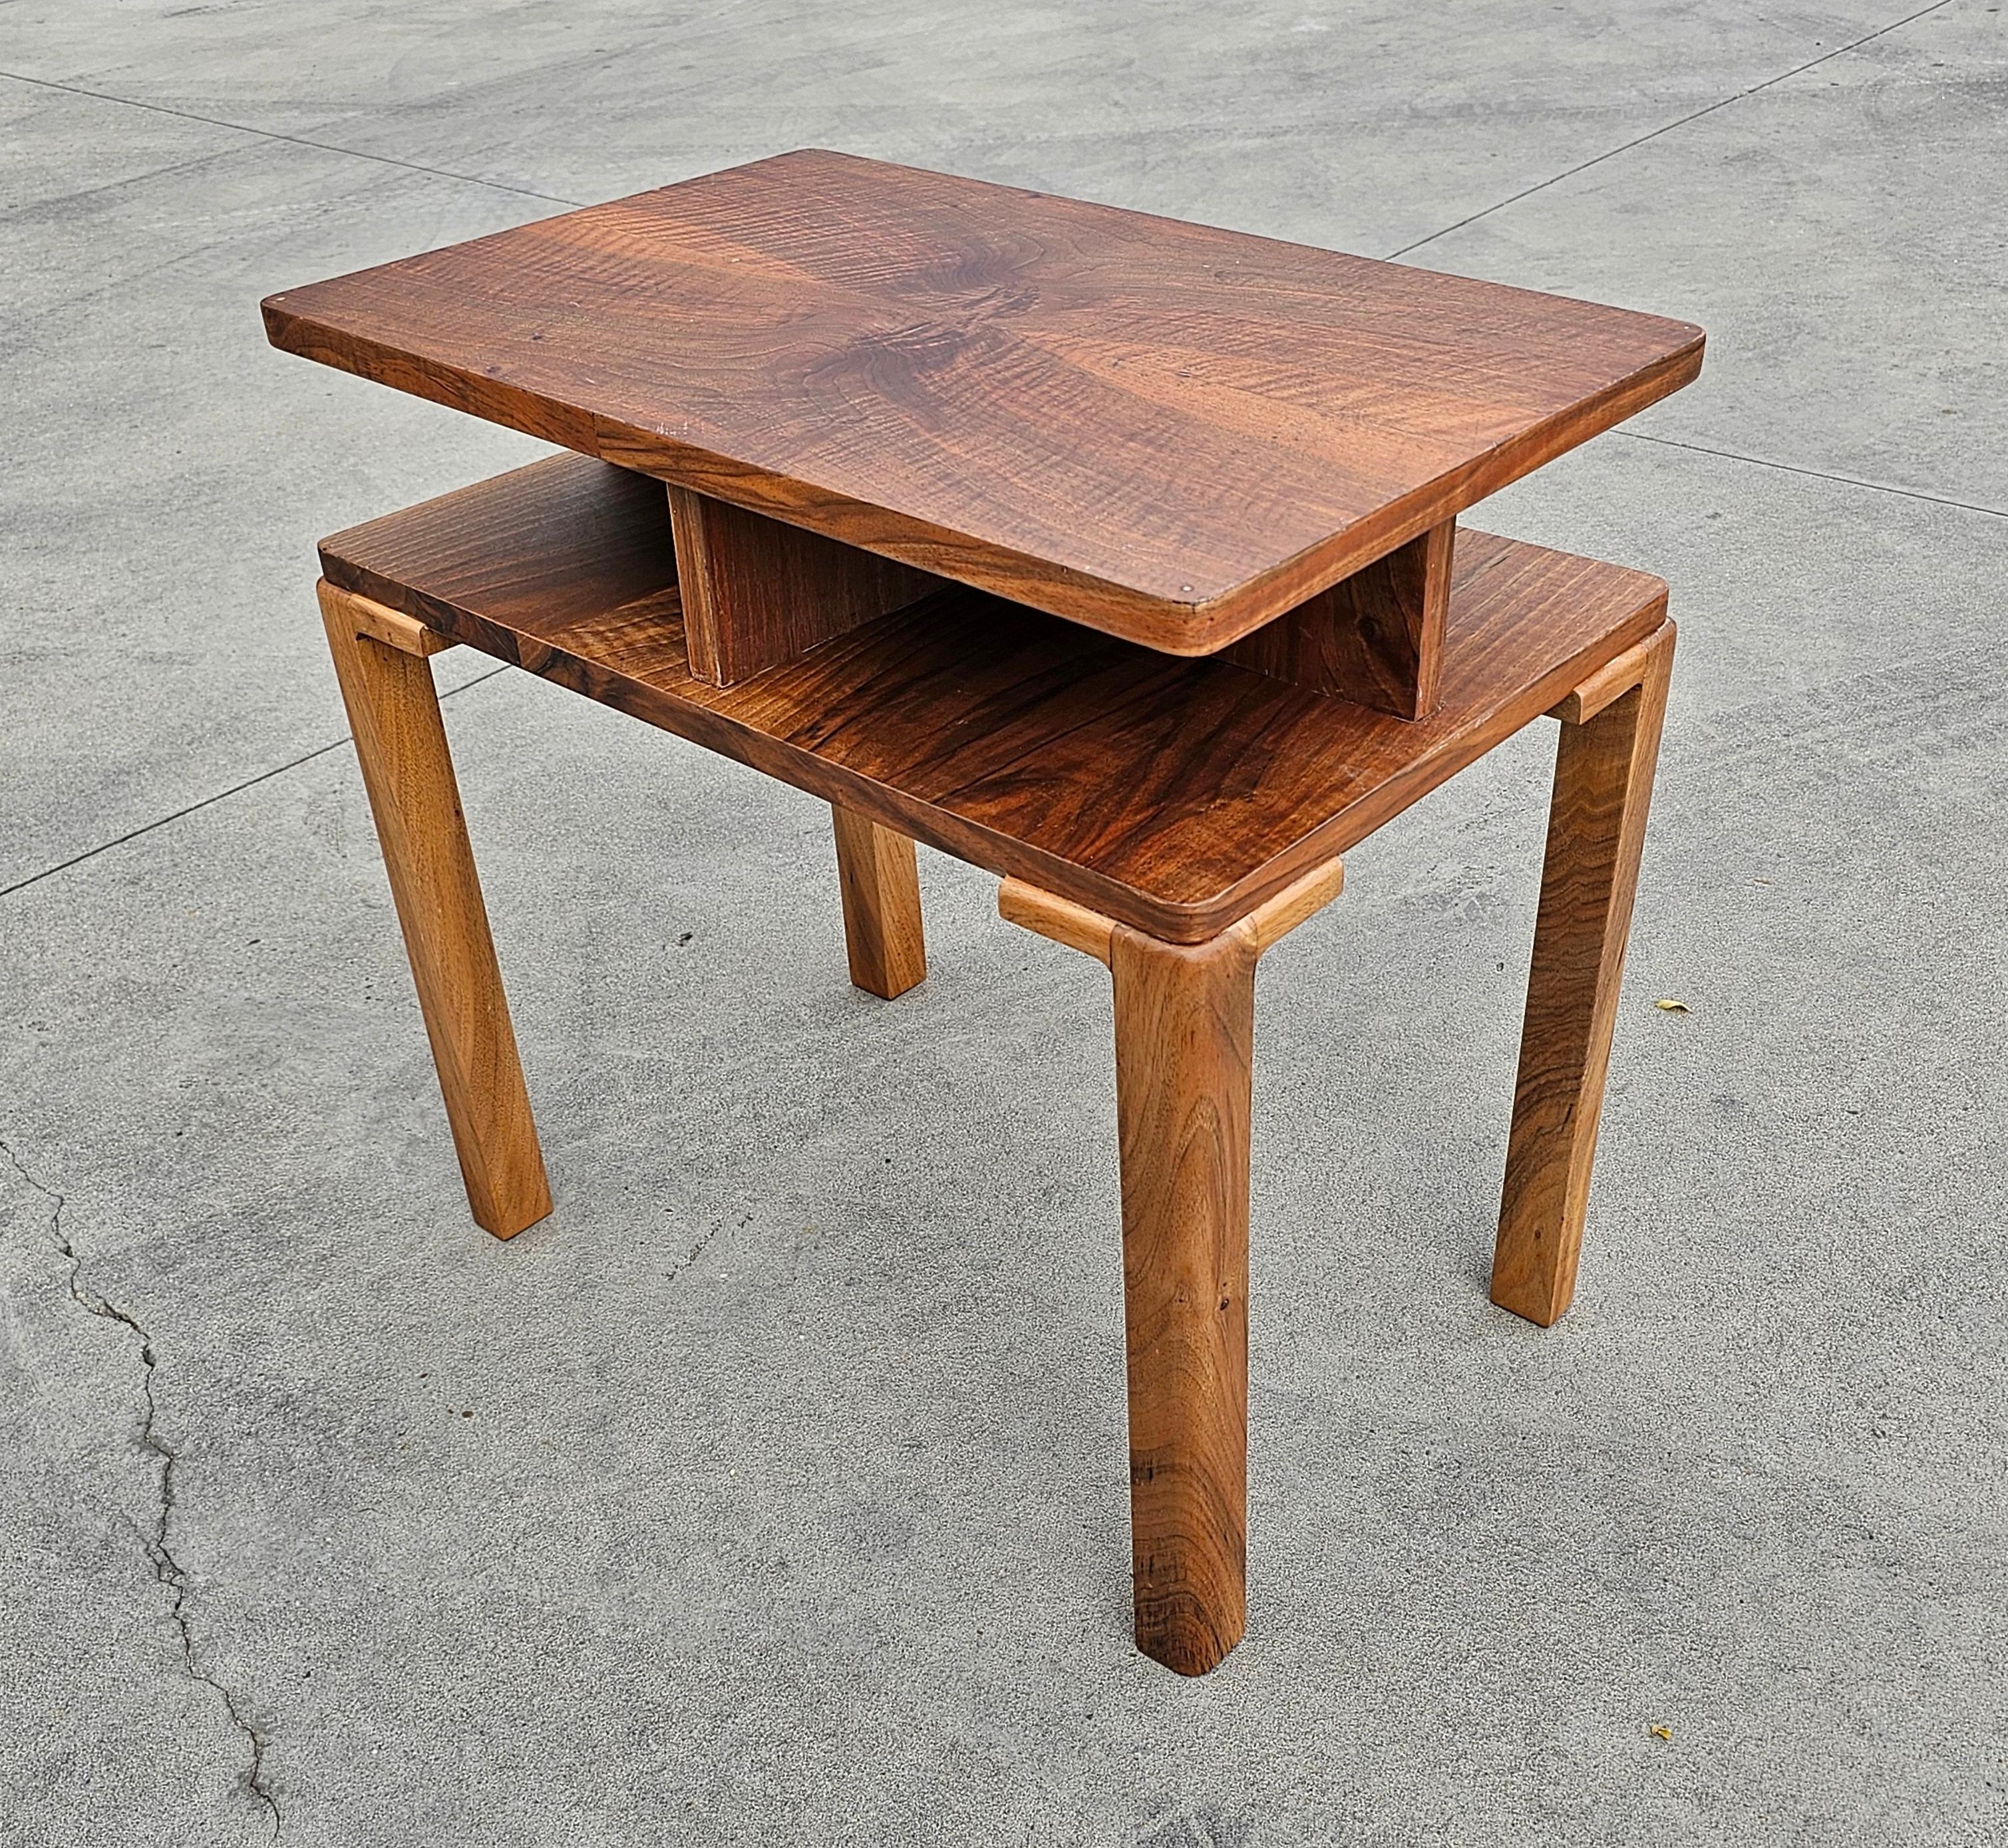 Rectangular Two Tiered Art Deco Walnut Side Table, Austria 1930s For Sale 1